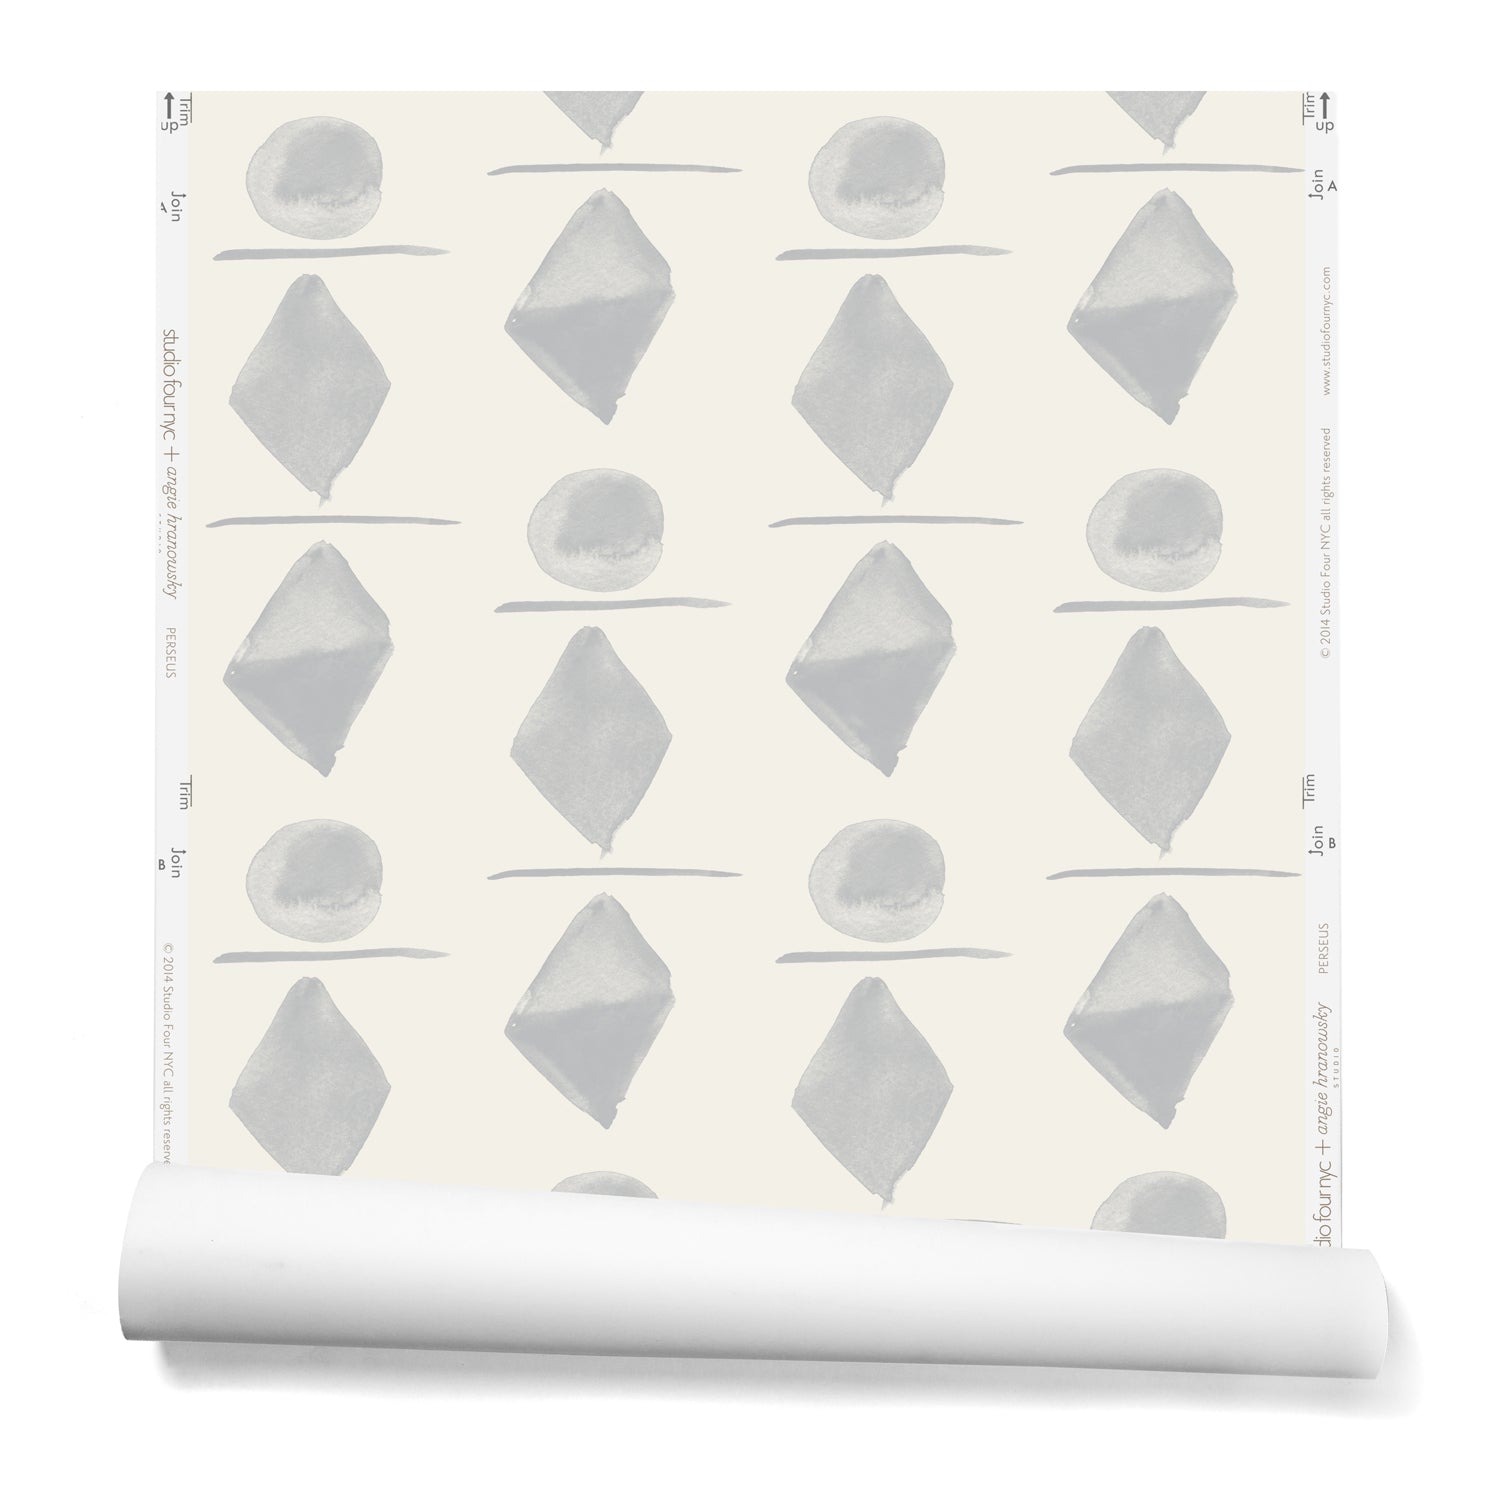 Partially unrolledwallpaper in a large-scale pattern of gray watercolored diamonds, circles and lines on a cream background. 